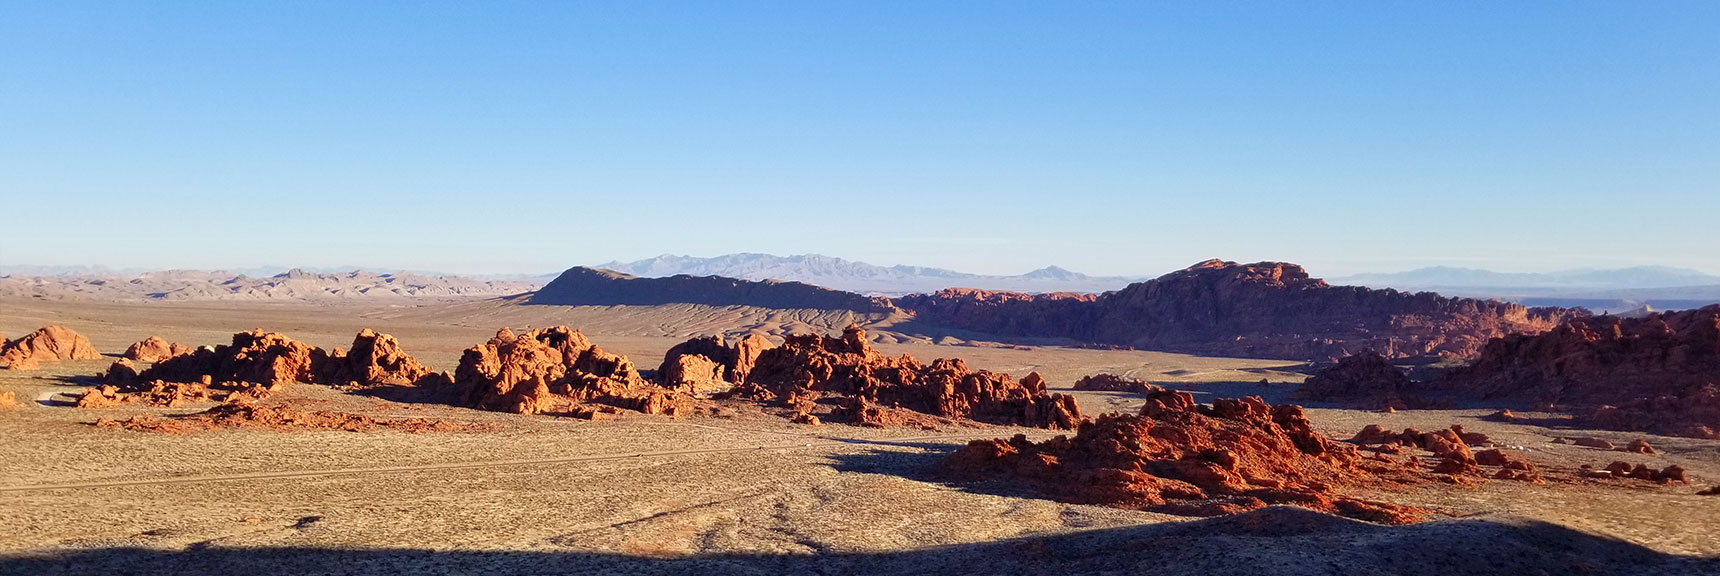 Valley of Fire State Park at Sunrise From the Muddy Mountains Wilderness, Nevada